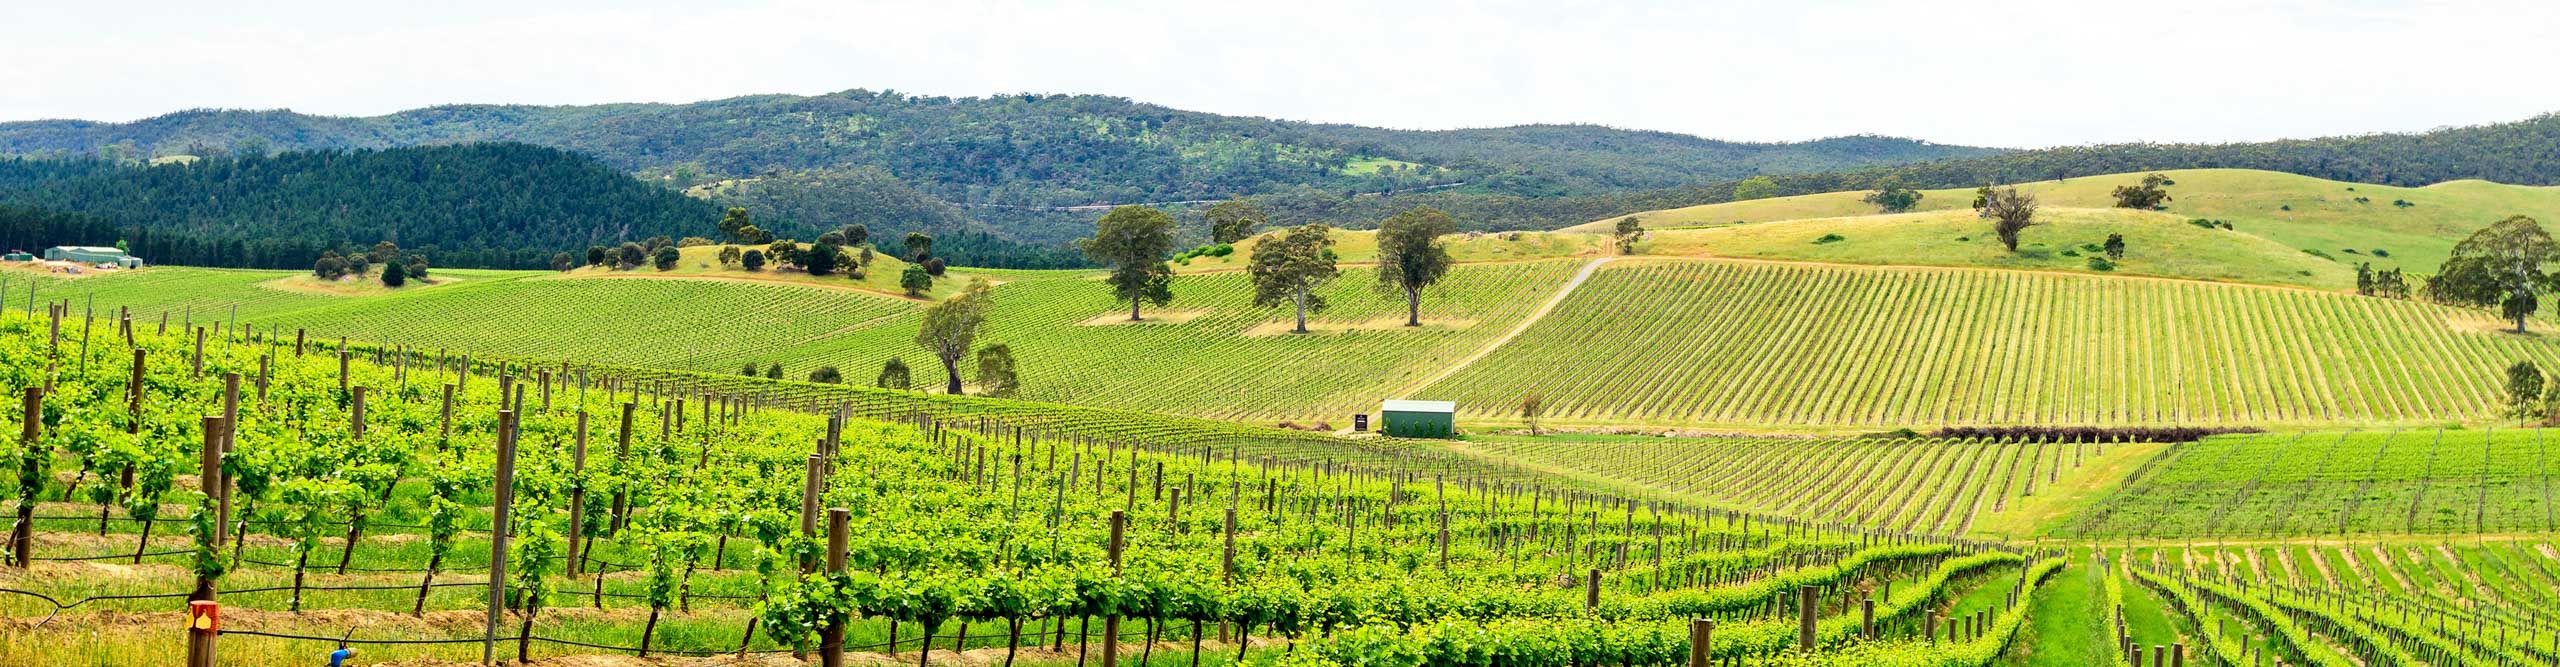 Sweeping view of the hills in a vineyard in the Barossa Valley, South Australia 